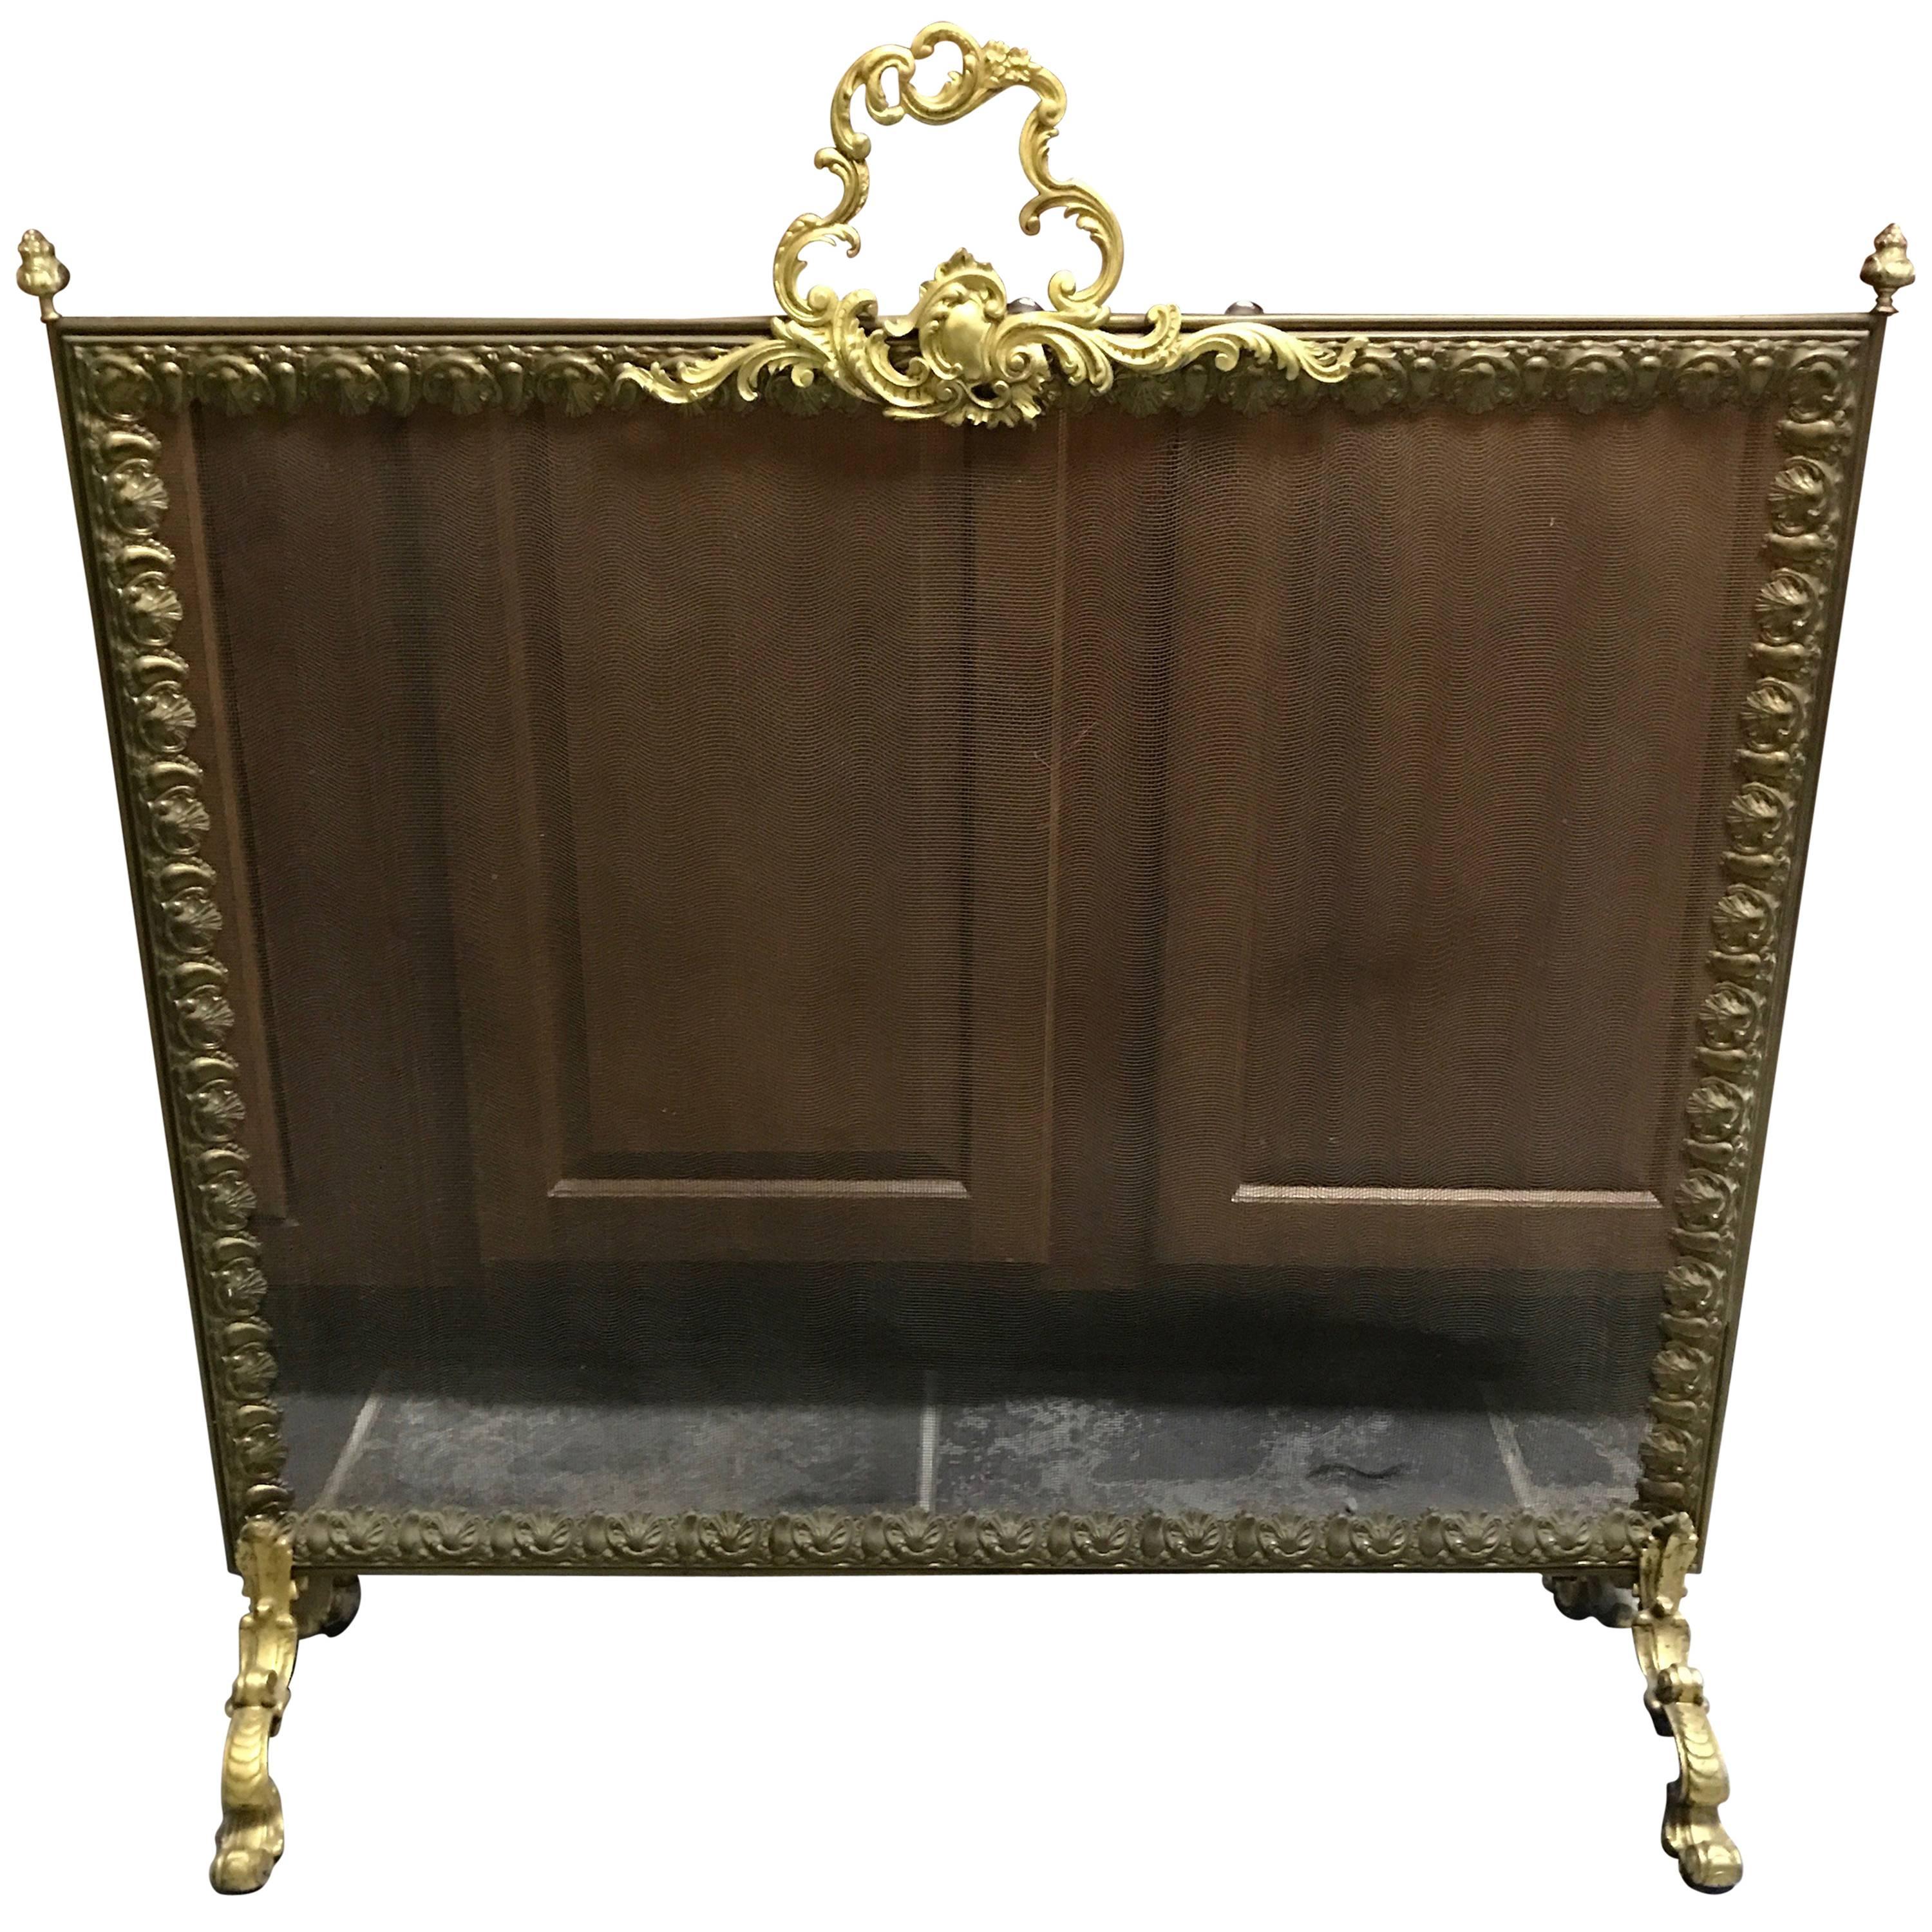 Absolutely beautiful fireplace screen having detailed fancy bronze periphery, ornate dolphin motif feet, pine cone finials and doré bronze handle on top.